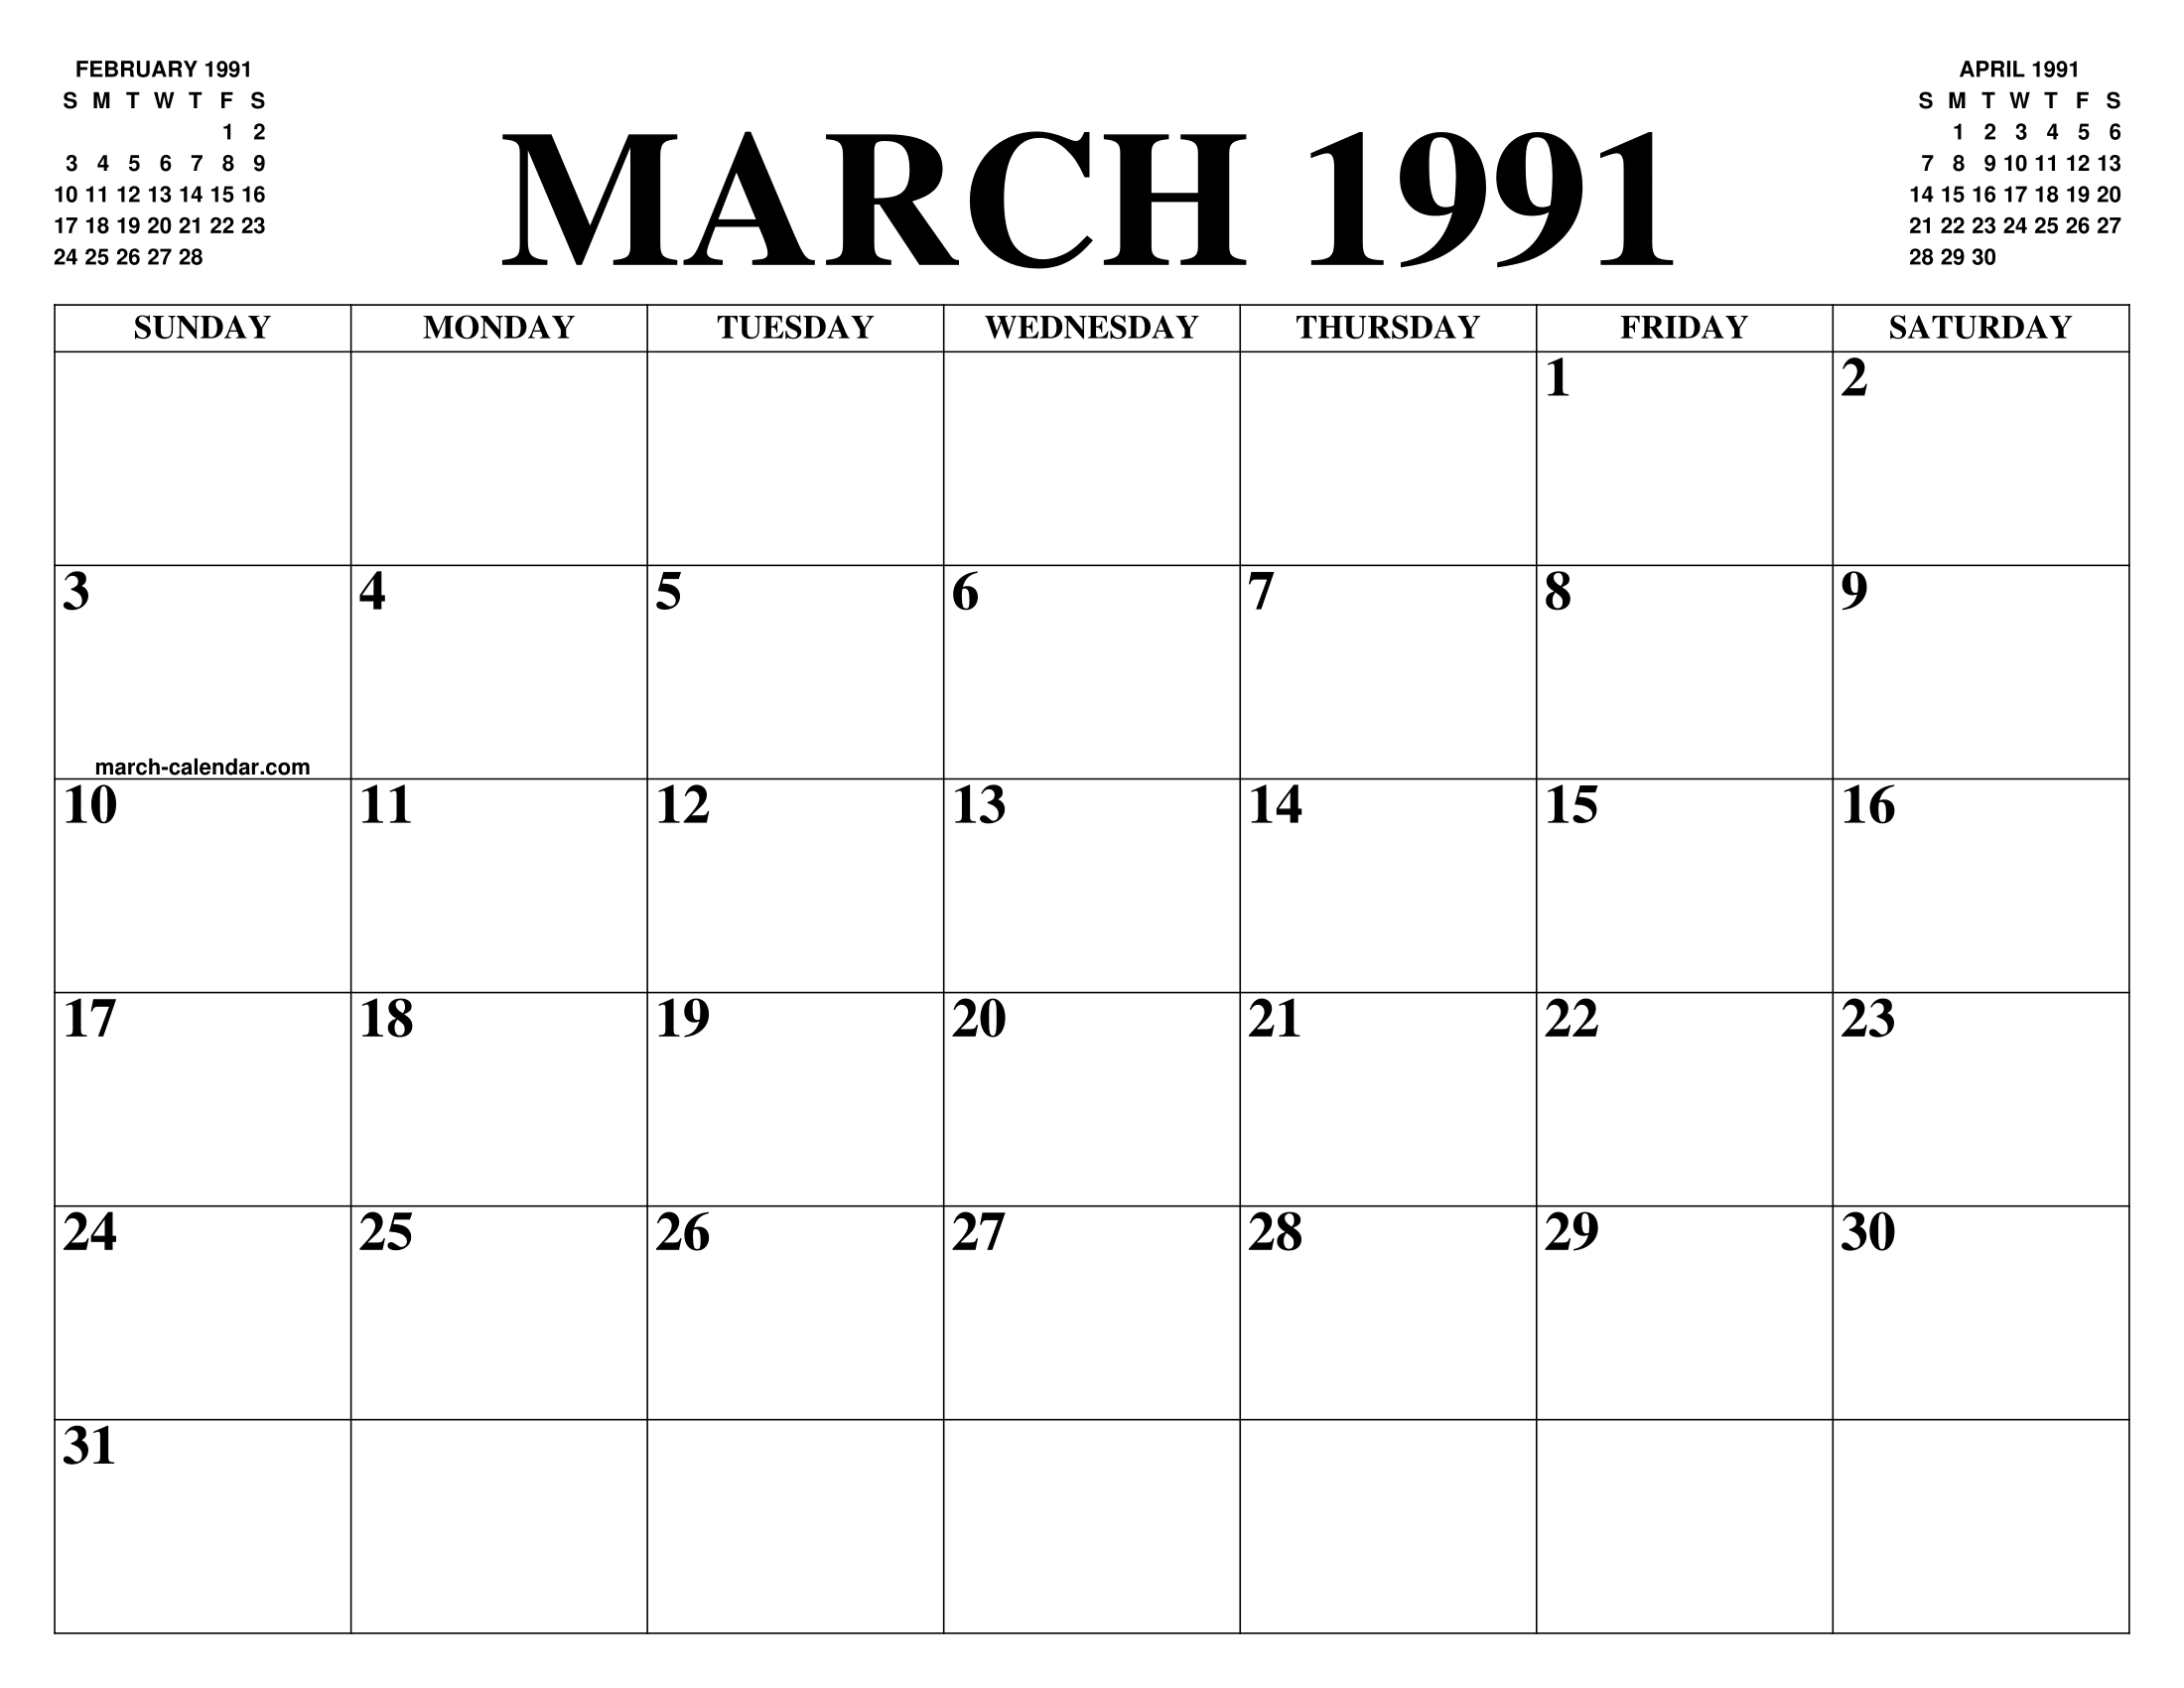 MARCH 1991 CALENDAR OF THE MONTH: FREE PRINTABLE MARCH CALENDAR OF THE